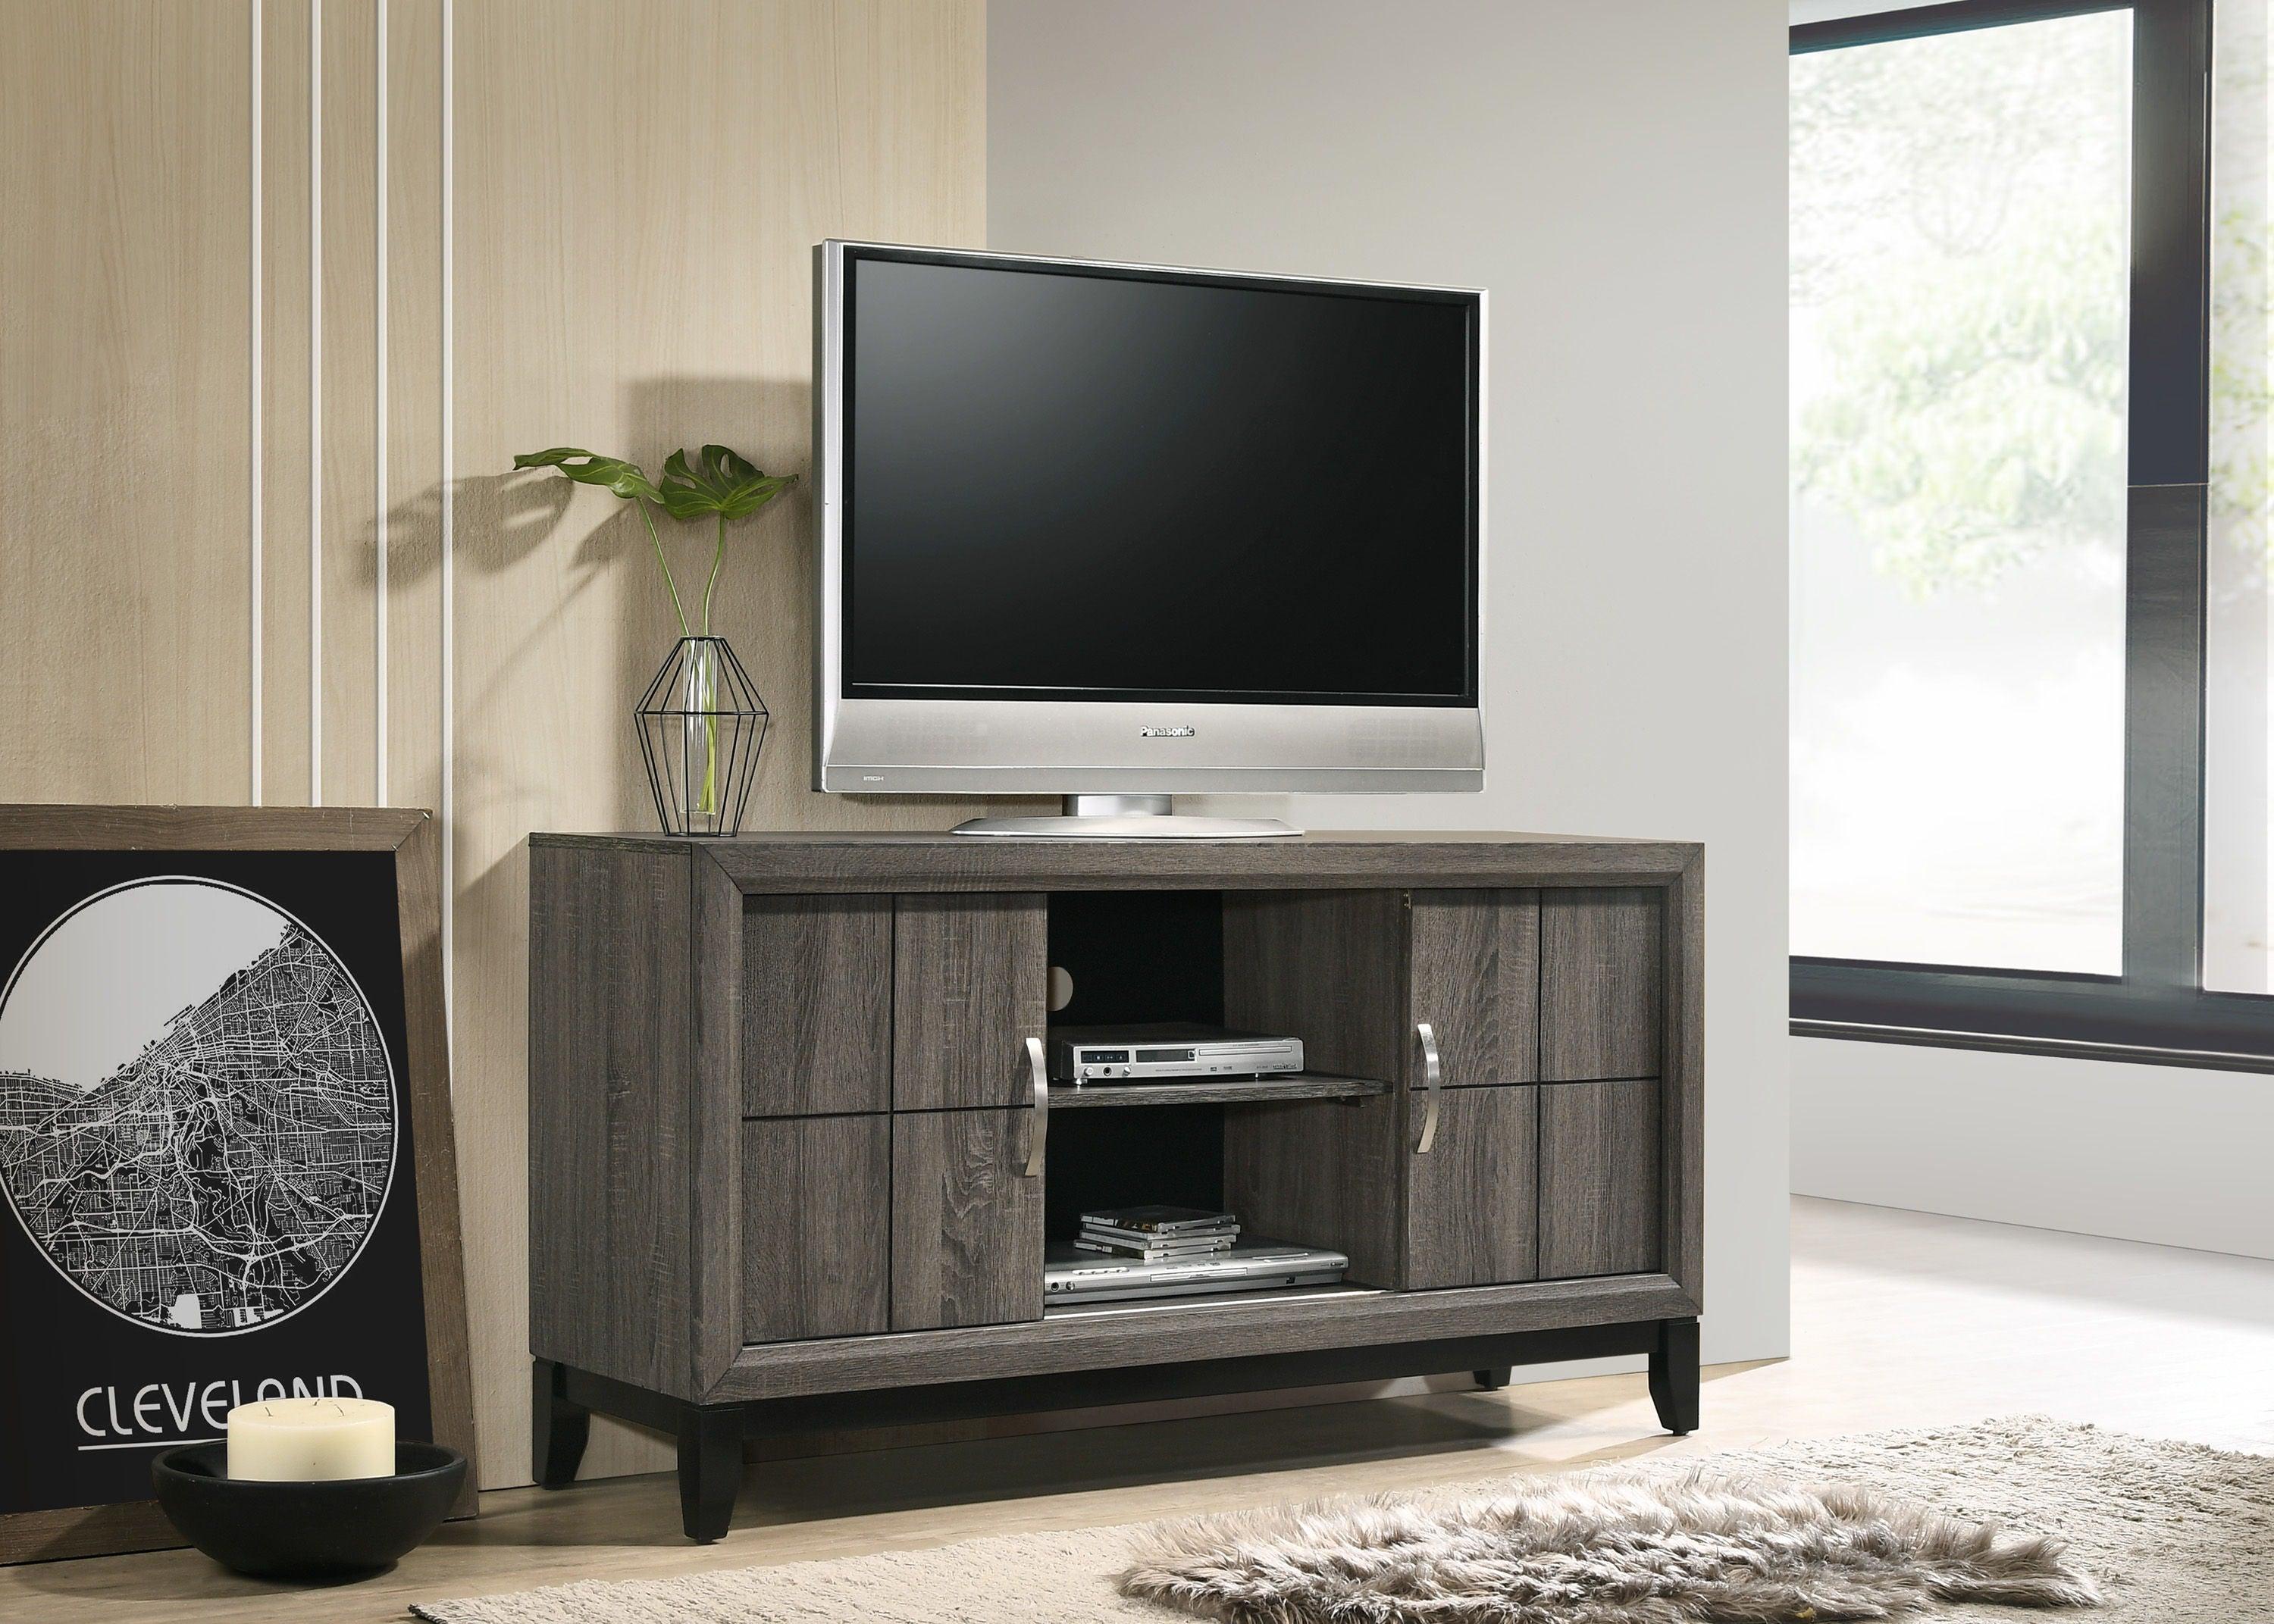 Crown Mark - Akerson - Tv Stand - Gray - 5th Avenue Furniture